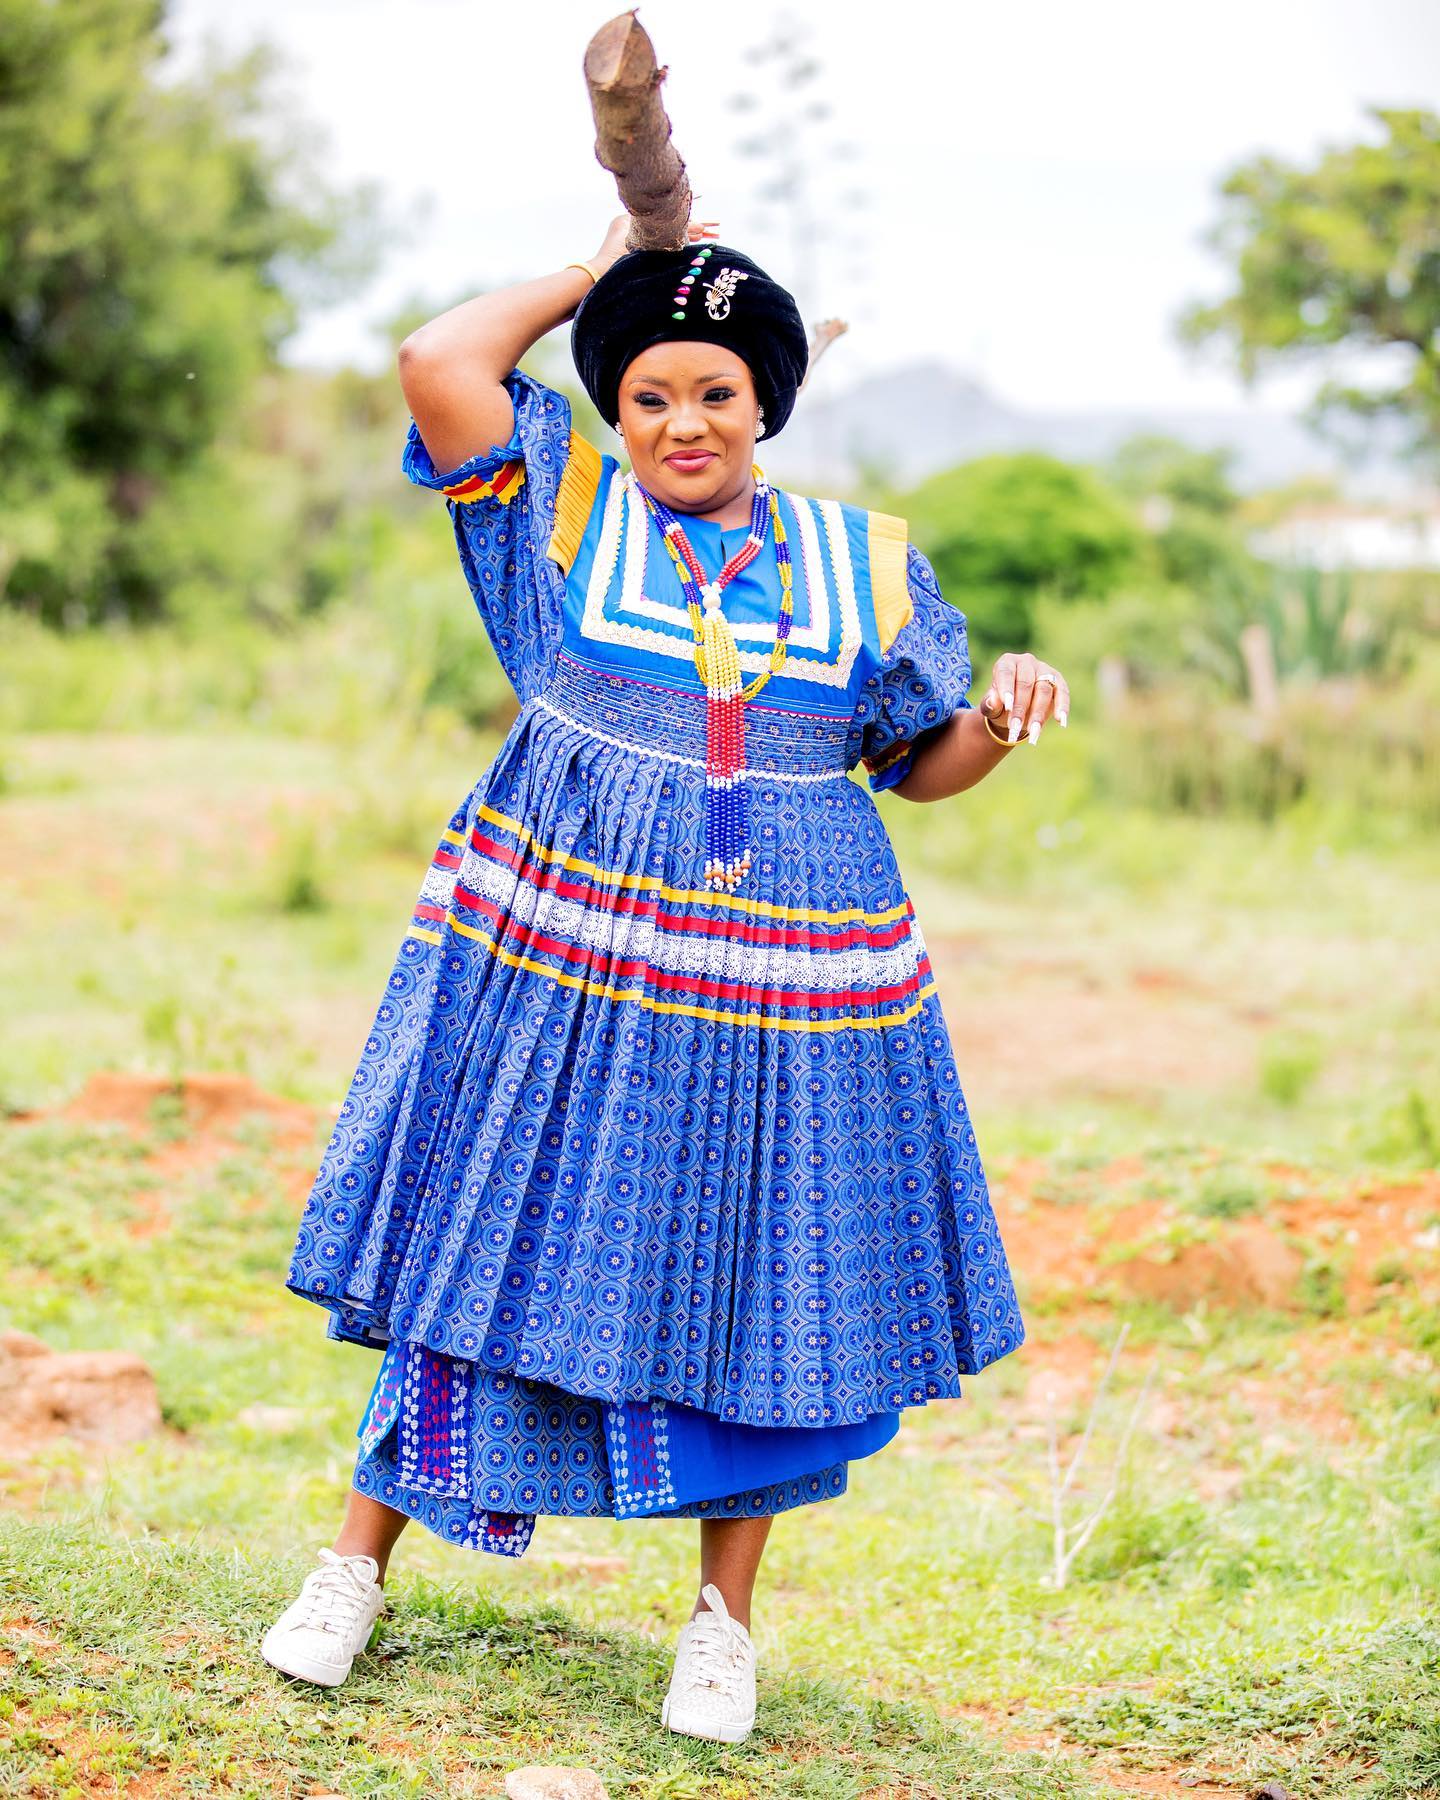 Have you ever tried Sepedi typical wedding ceremony dresses? It is one of the most vivid tribes in South Africa due to the fact it is made of vibrant hues that signify happiness